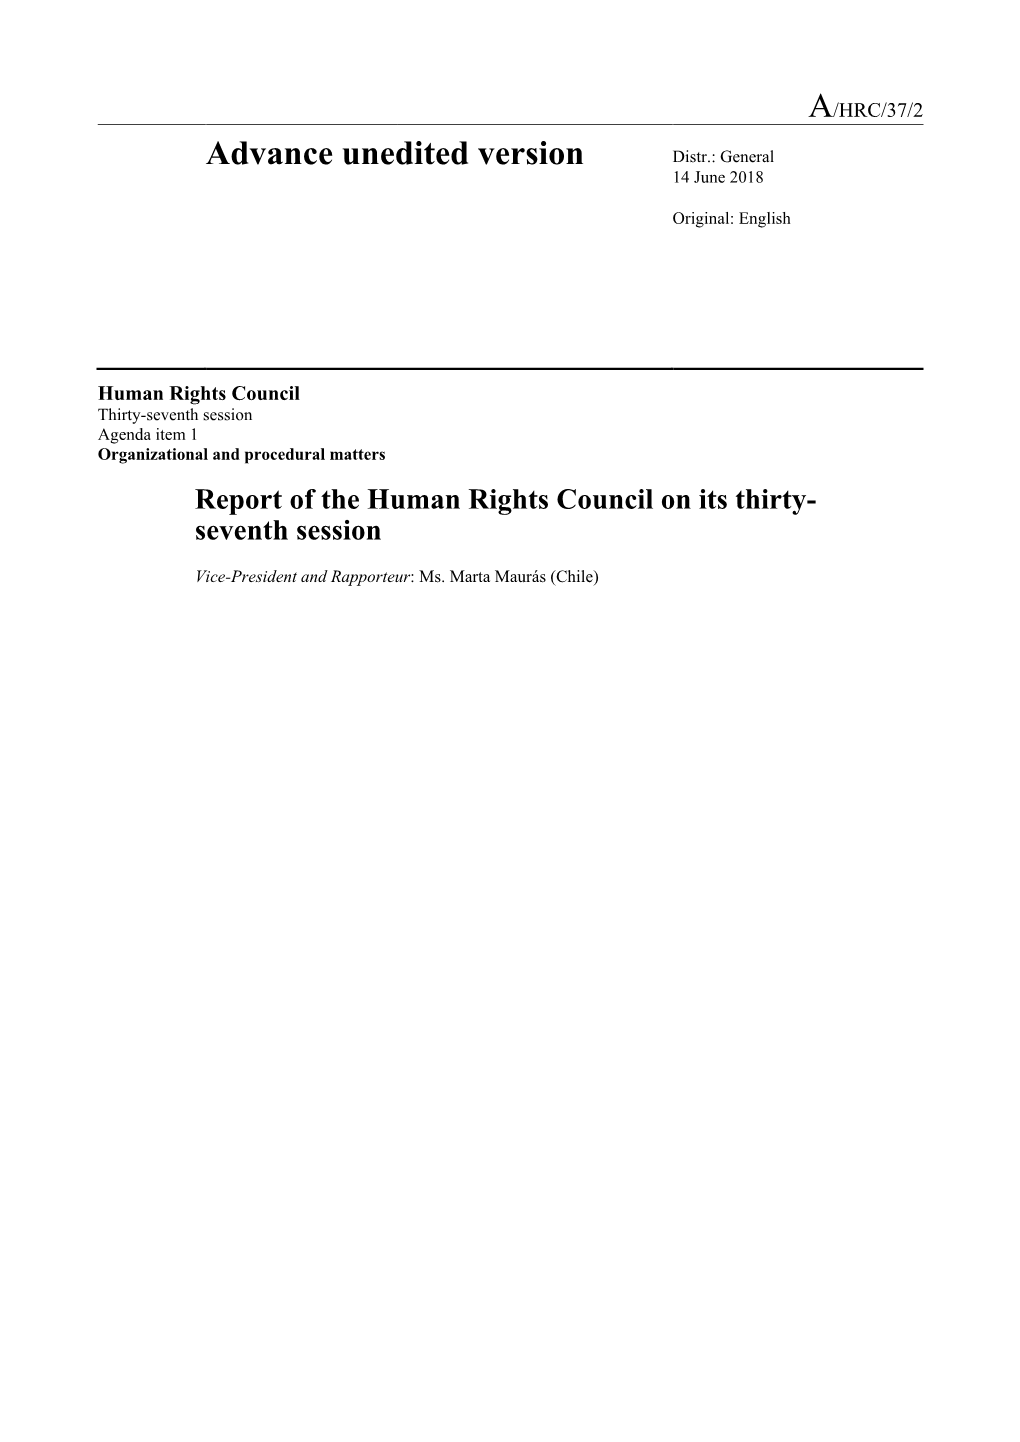 Report of the Human Rights Council on Its 37Th Session